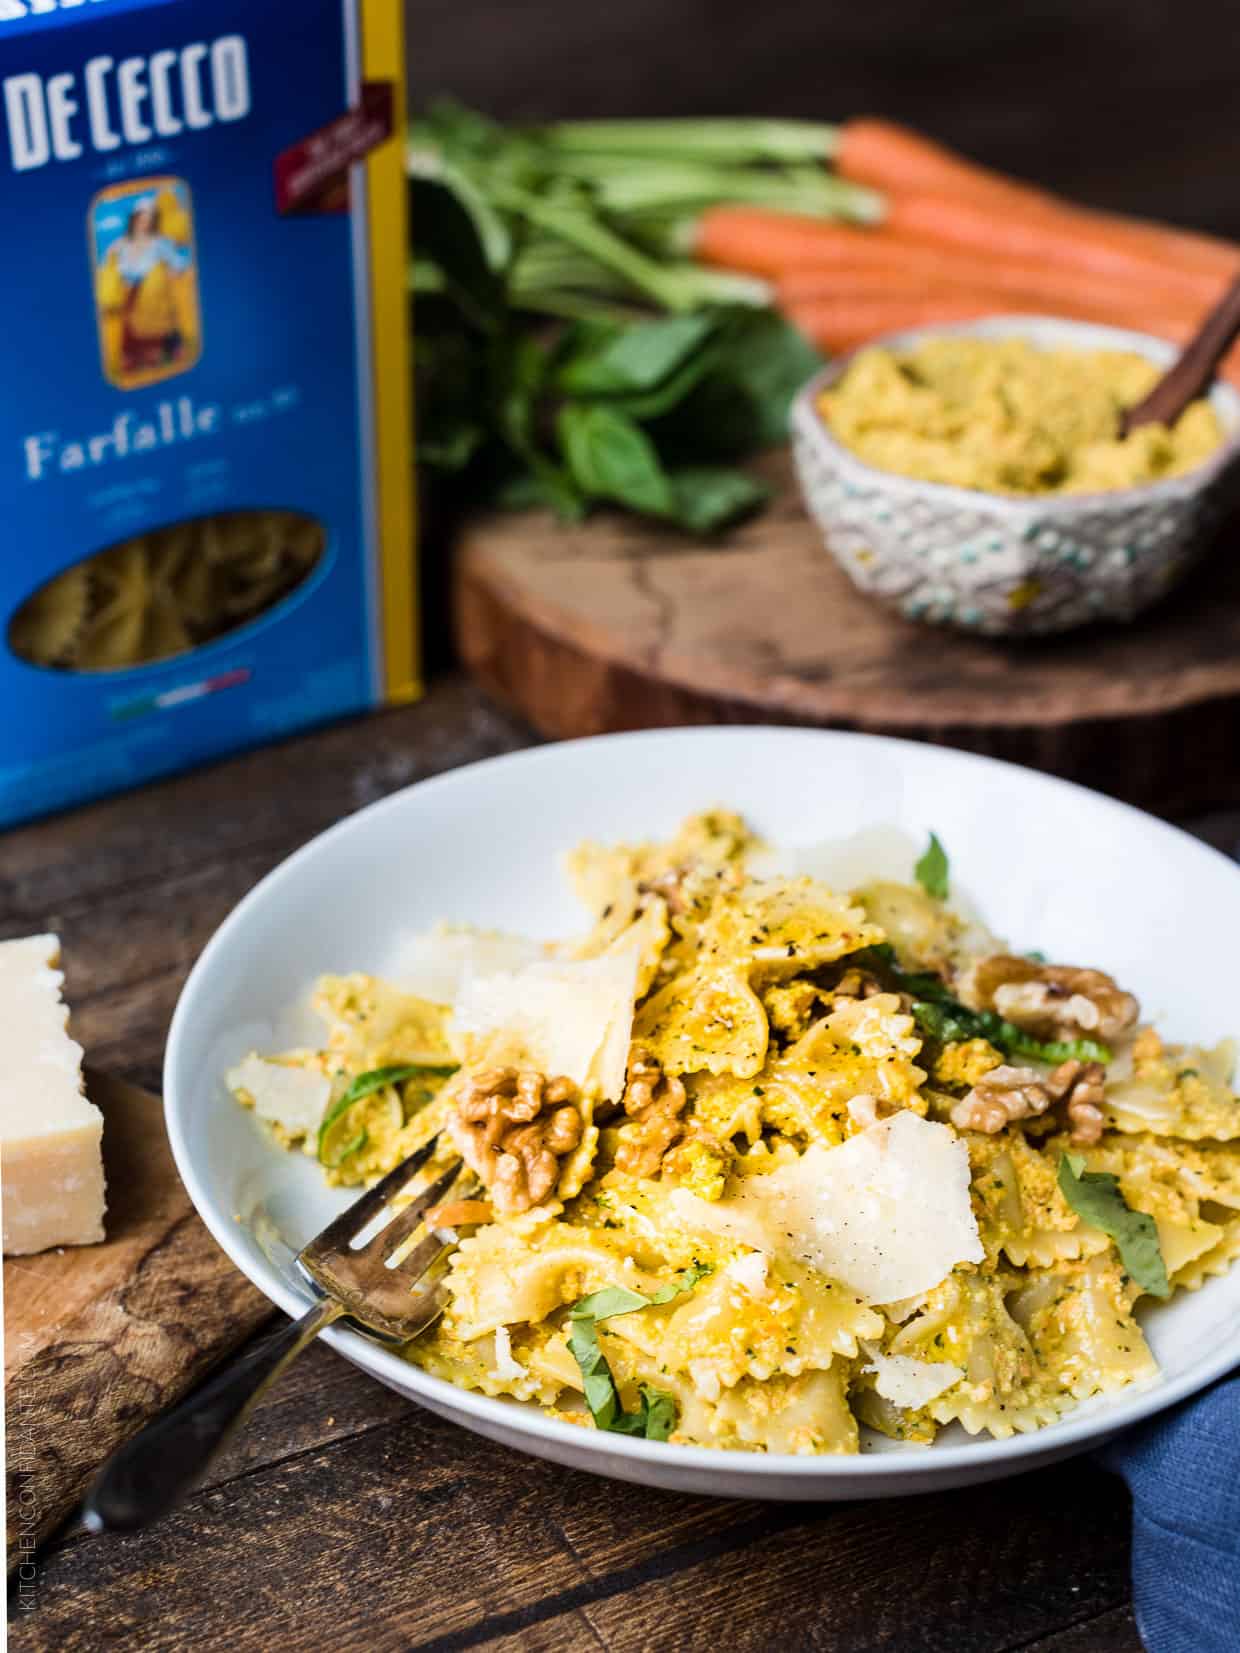 Farfalle with Roasted Carrot Pesto garnished with toasted walnuts and Parmesan cheese on a white plate.